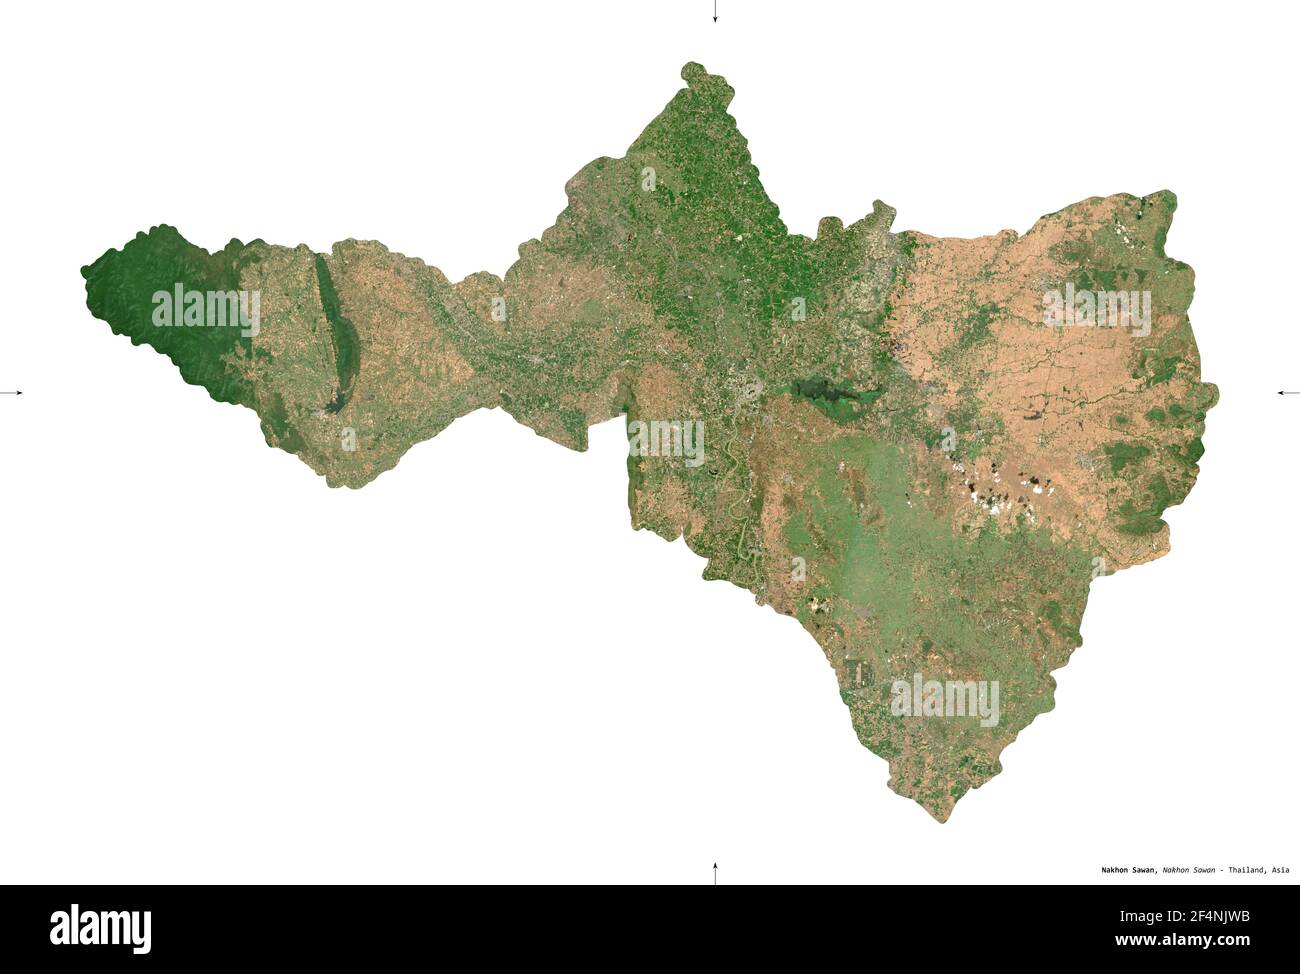 Nakhon Sawan, province of Thailand. Sentinel-2 satellite imagery. Shape isolated on white. Description, location of the capital. Contains modified Cop Stock Photo